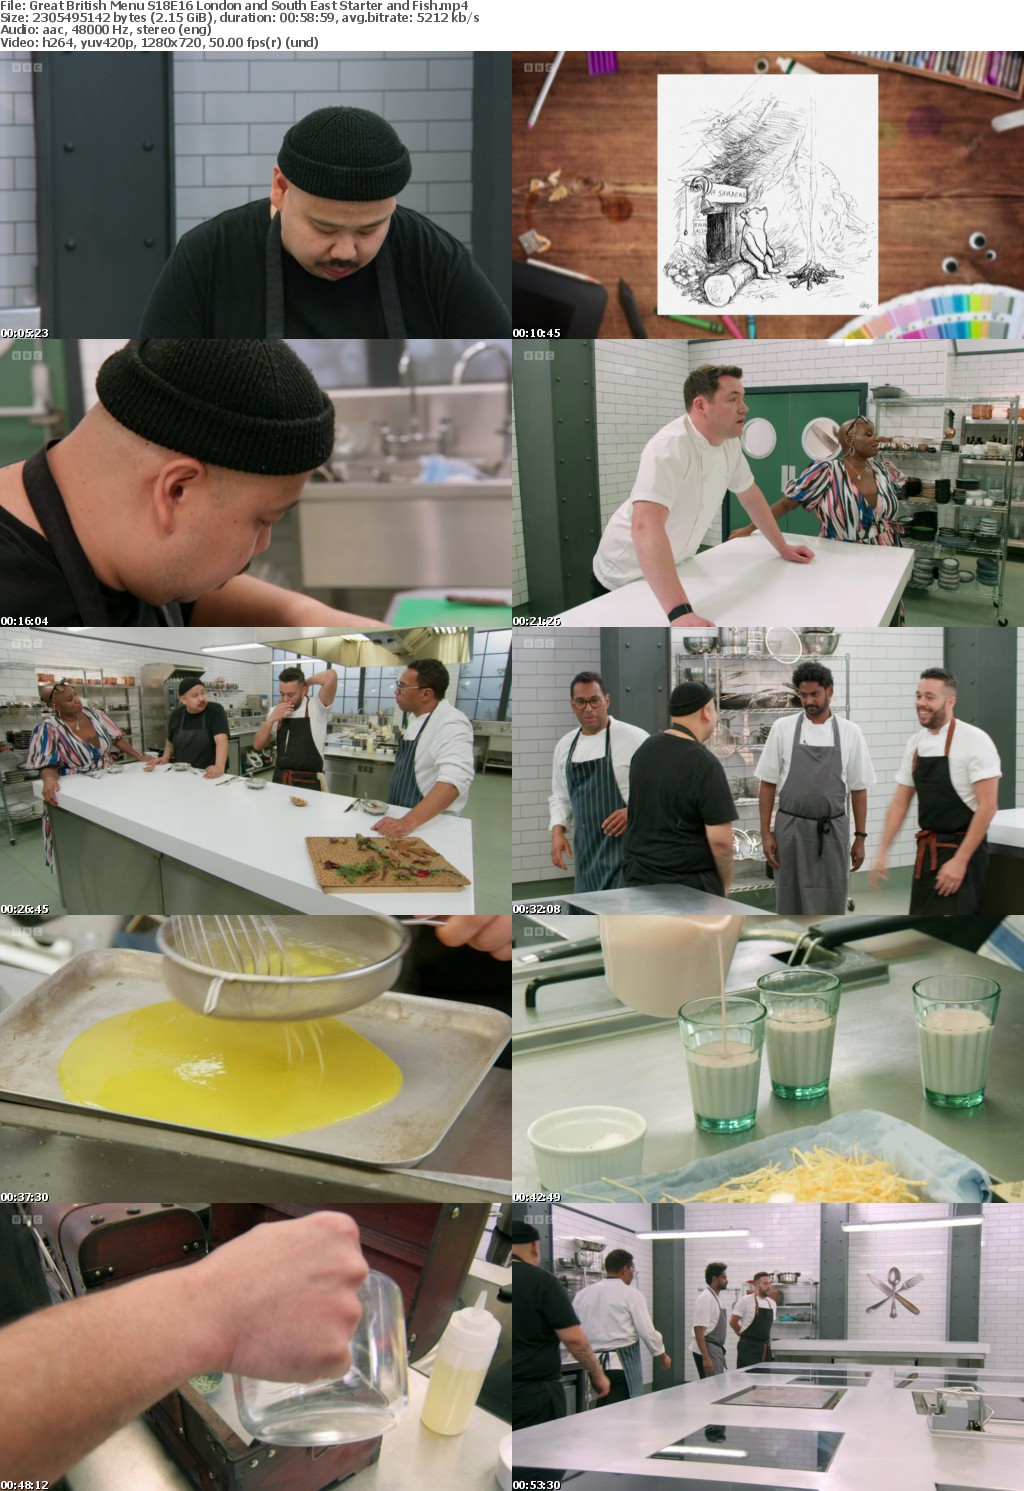 Great British Menu S18E16 London and South East Starter and Fish (1280x720p HD, 50fps, soft Eng subs)